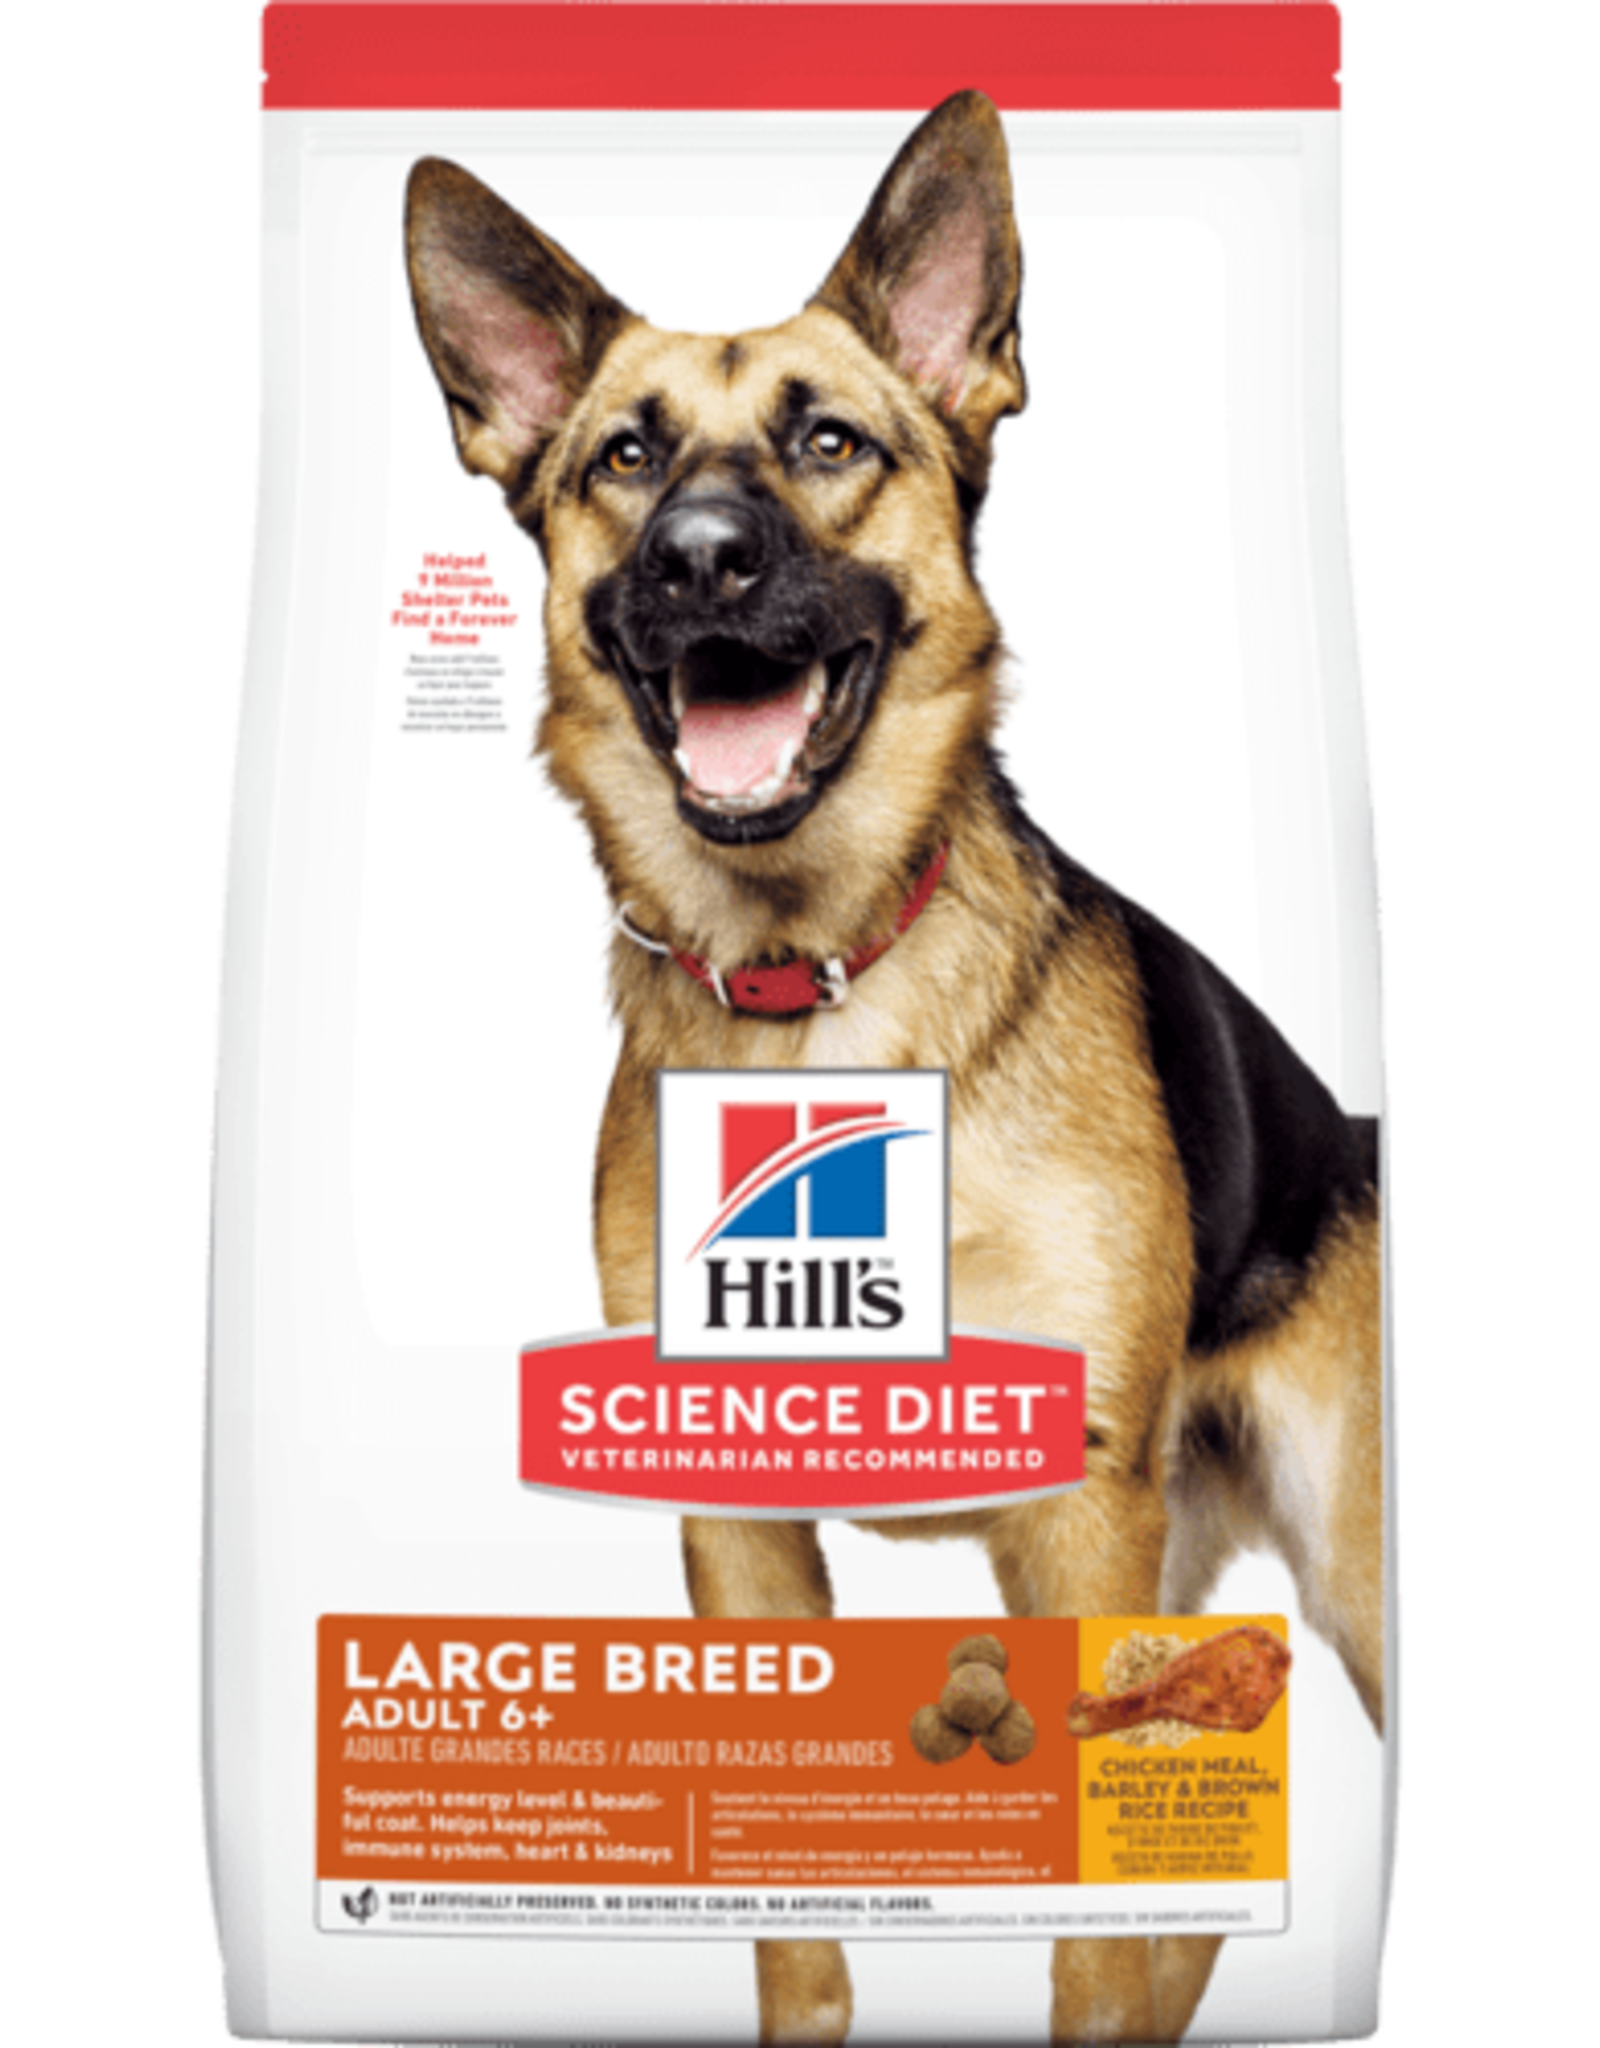 SCIENCE DIET HILL'S SCIENCE DIET CANINE LARGE BREED MATURE ADULT 6+ 15LBS